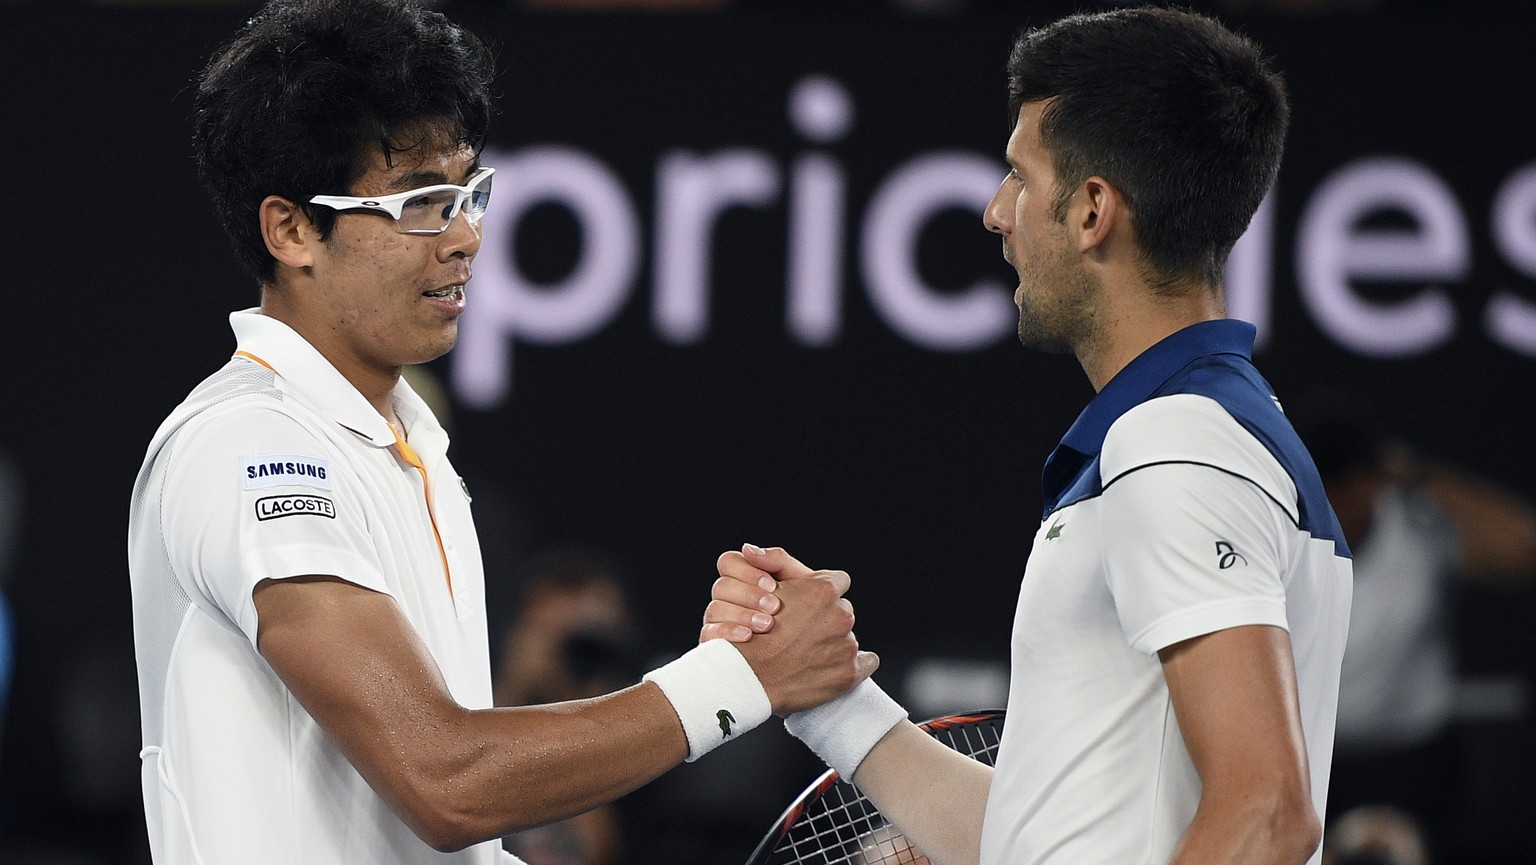 South Korea&#039;s Chung Hyeon, left, is congratulated by Serbia&#039;s Novak Djokovic after winning their fourth round match at the Australian Open tennis championships in Melbourne, Australia, Monda ...